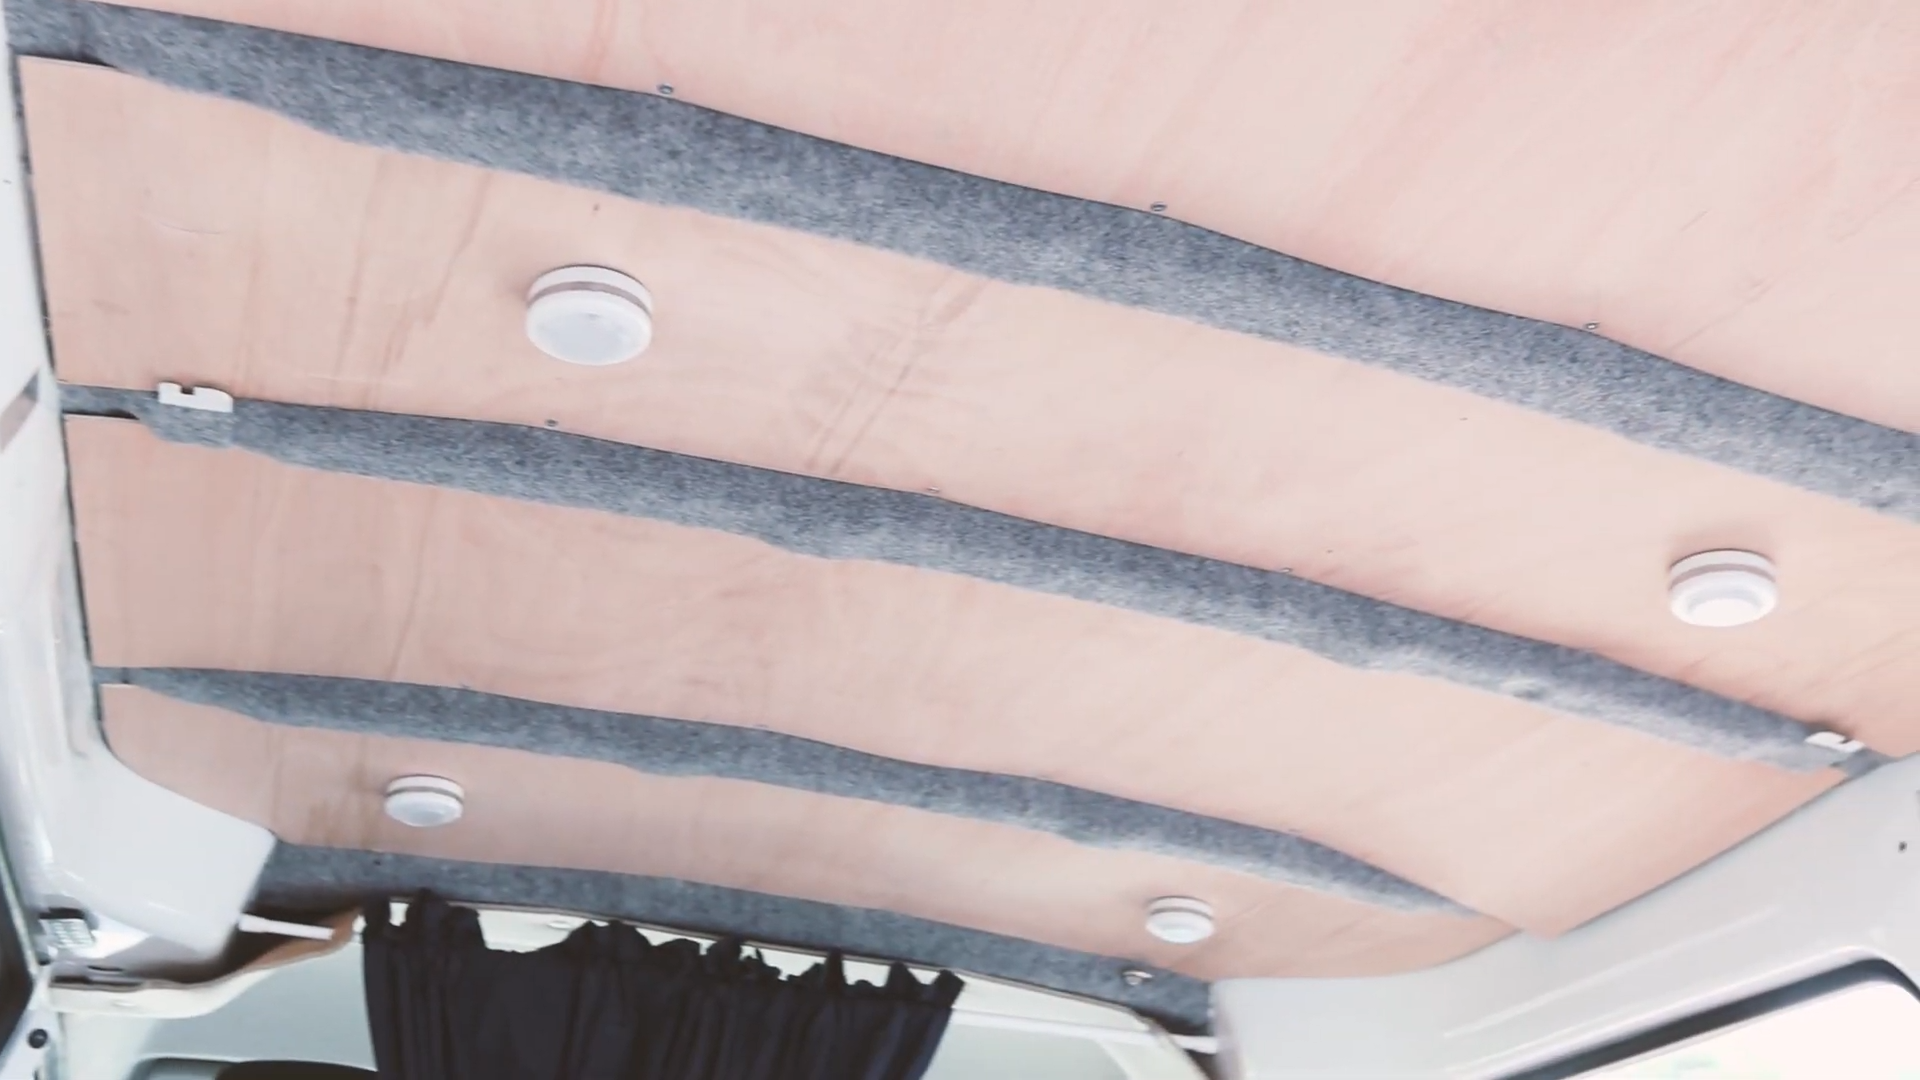 The insulated, carpeted and plywood lined van ceiling